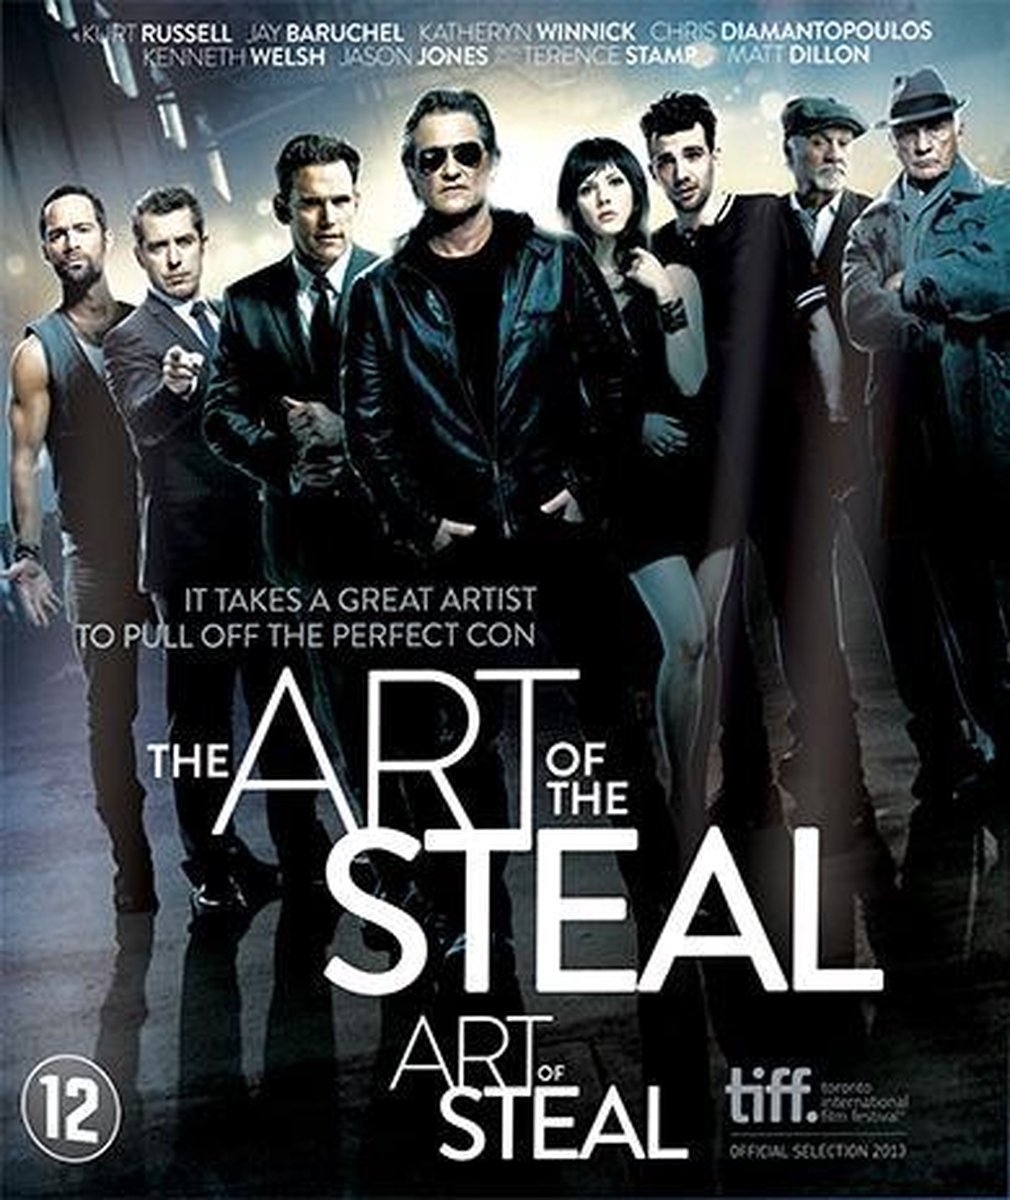 THE ART OF THE STEAL